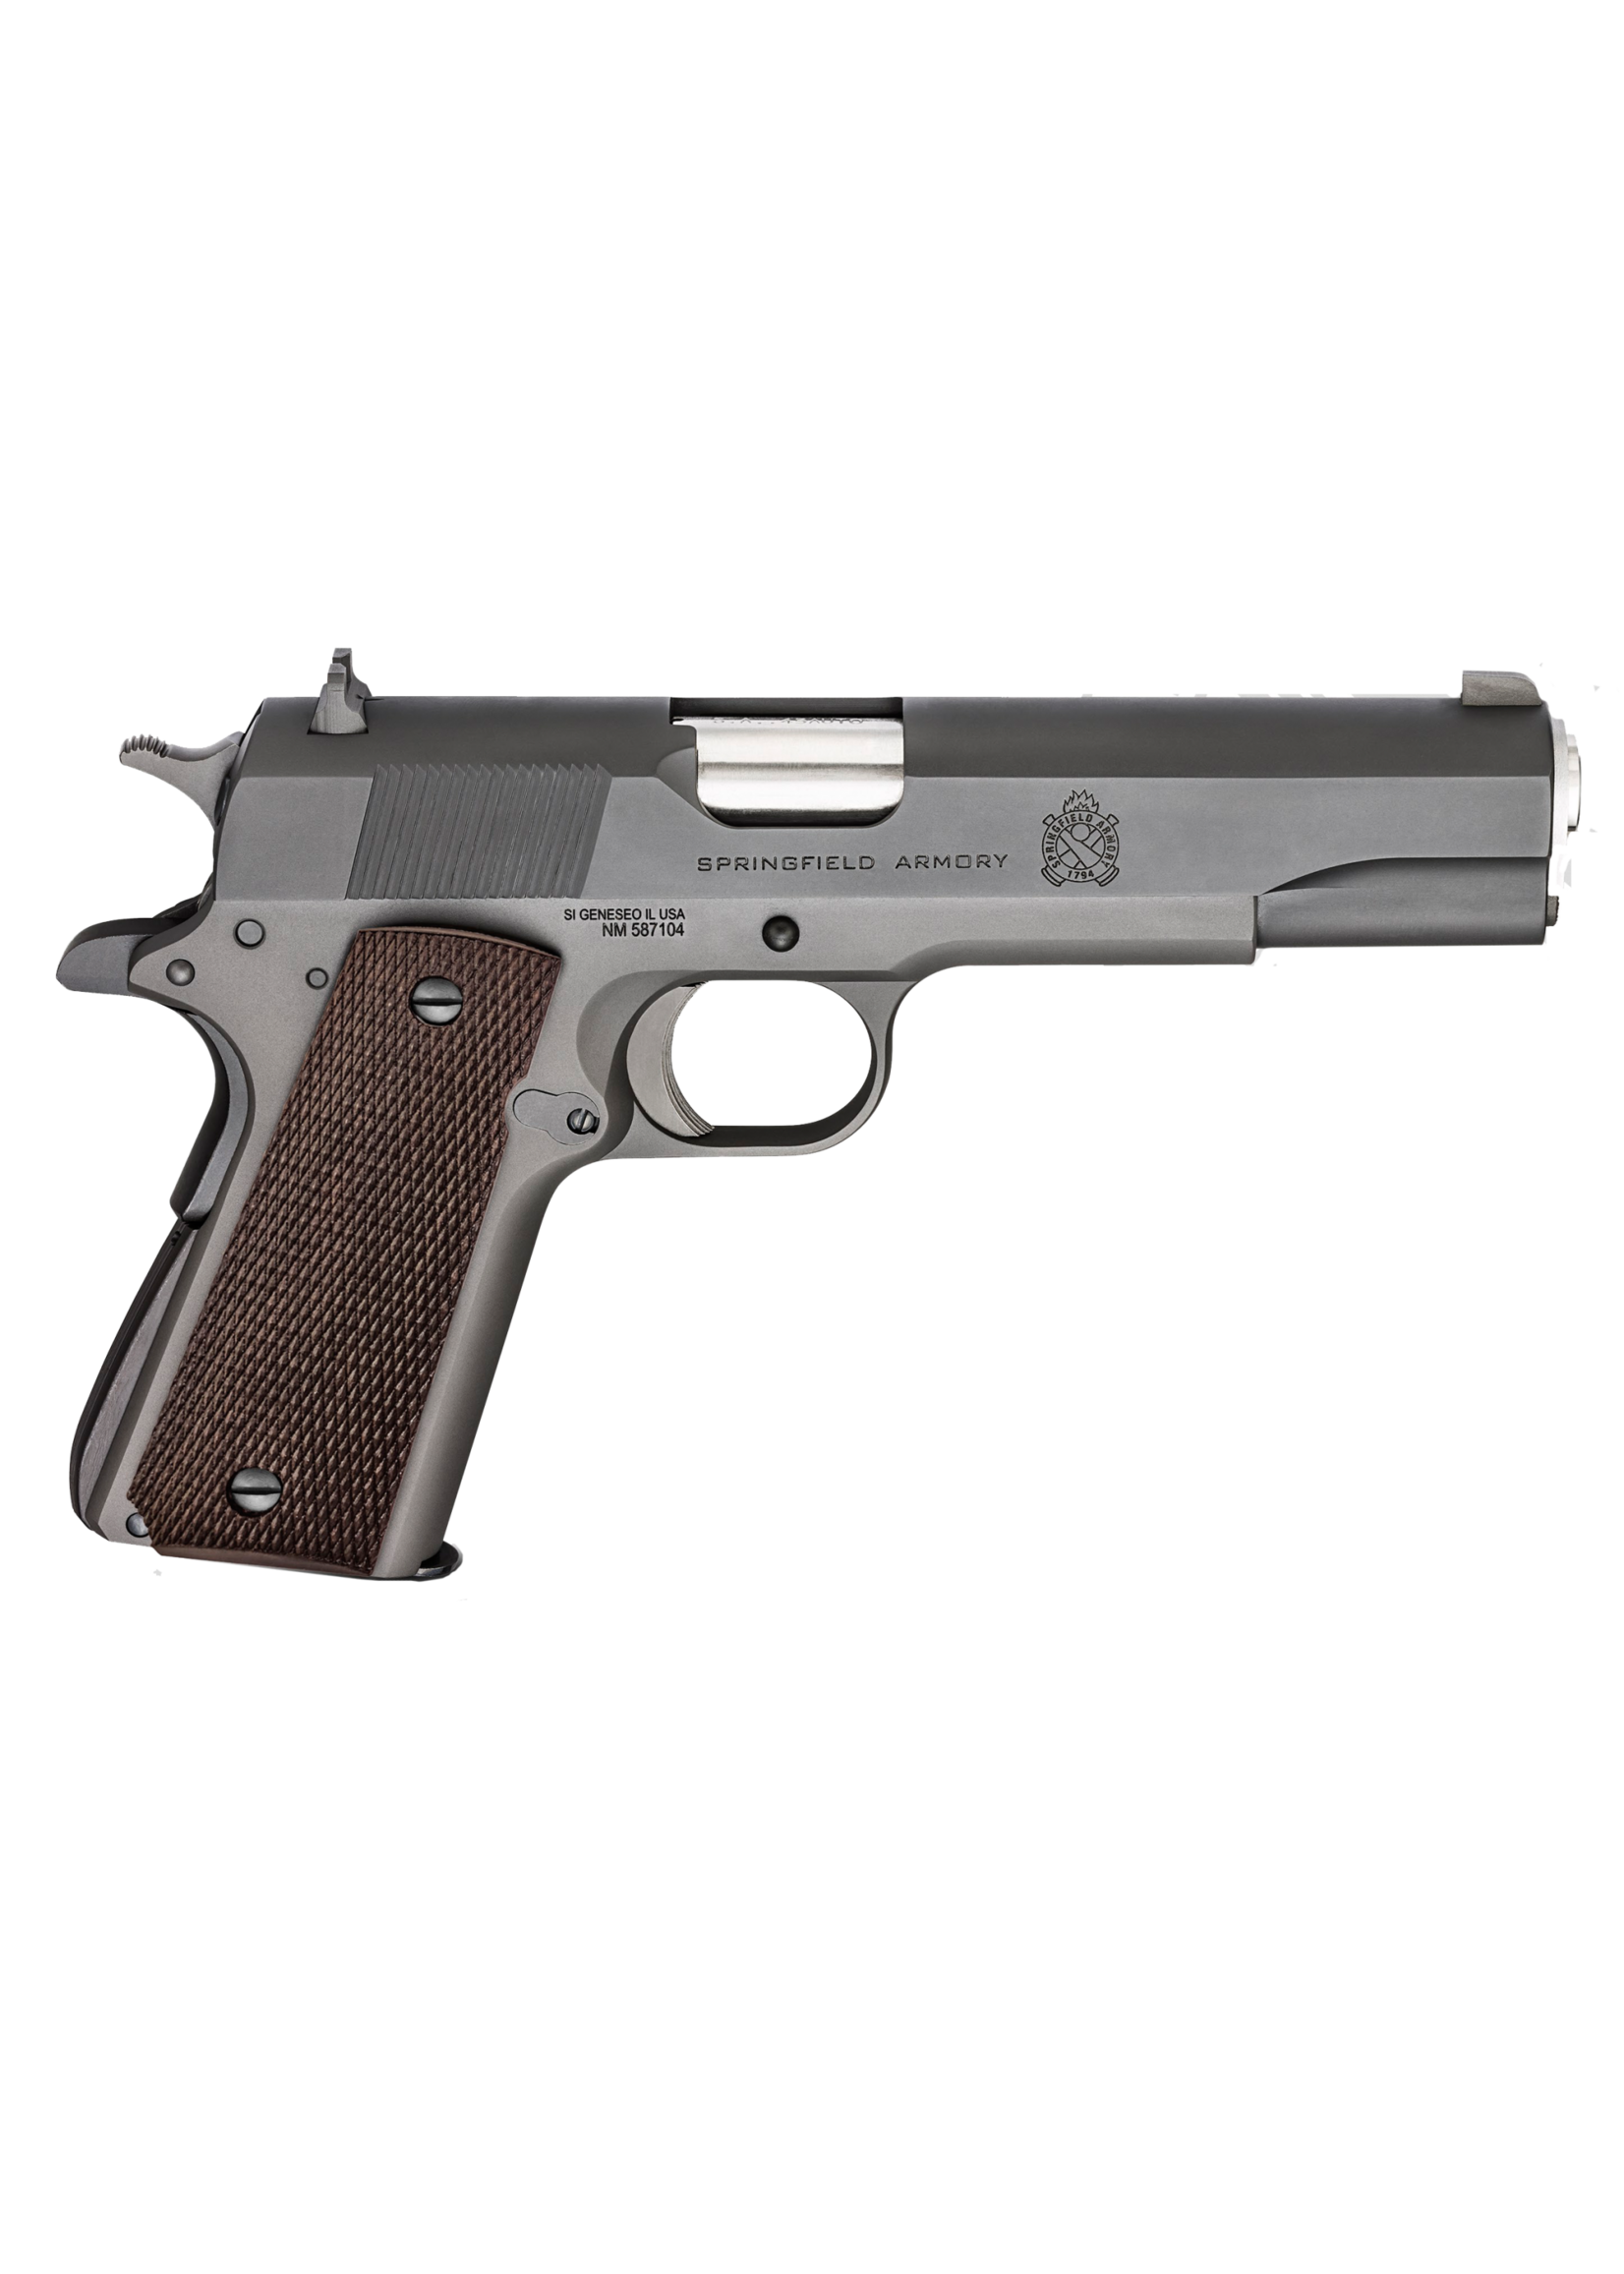 Springfield Armory Springfield Armory 1911 Mil-Spec Defender Legacy 45 ACP Caliber with 5" Barrel, 7+1 Capacity, Overall Black Parkerized Finish Carbon Steel, Beavertail Frame, Serrated Slide & Crossed Cannon Cocobolo Grip